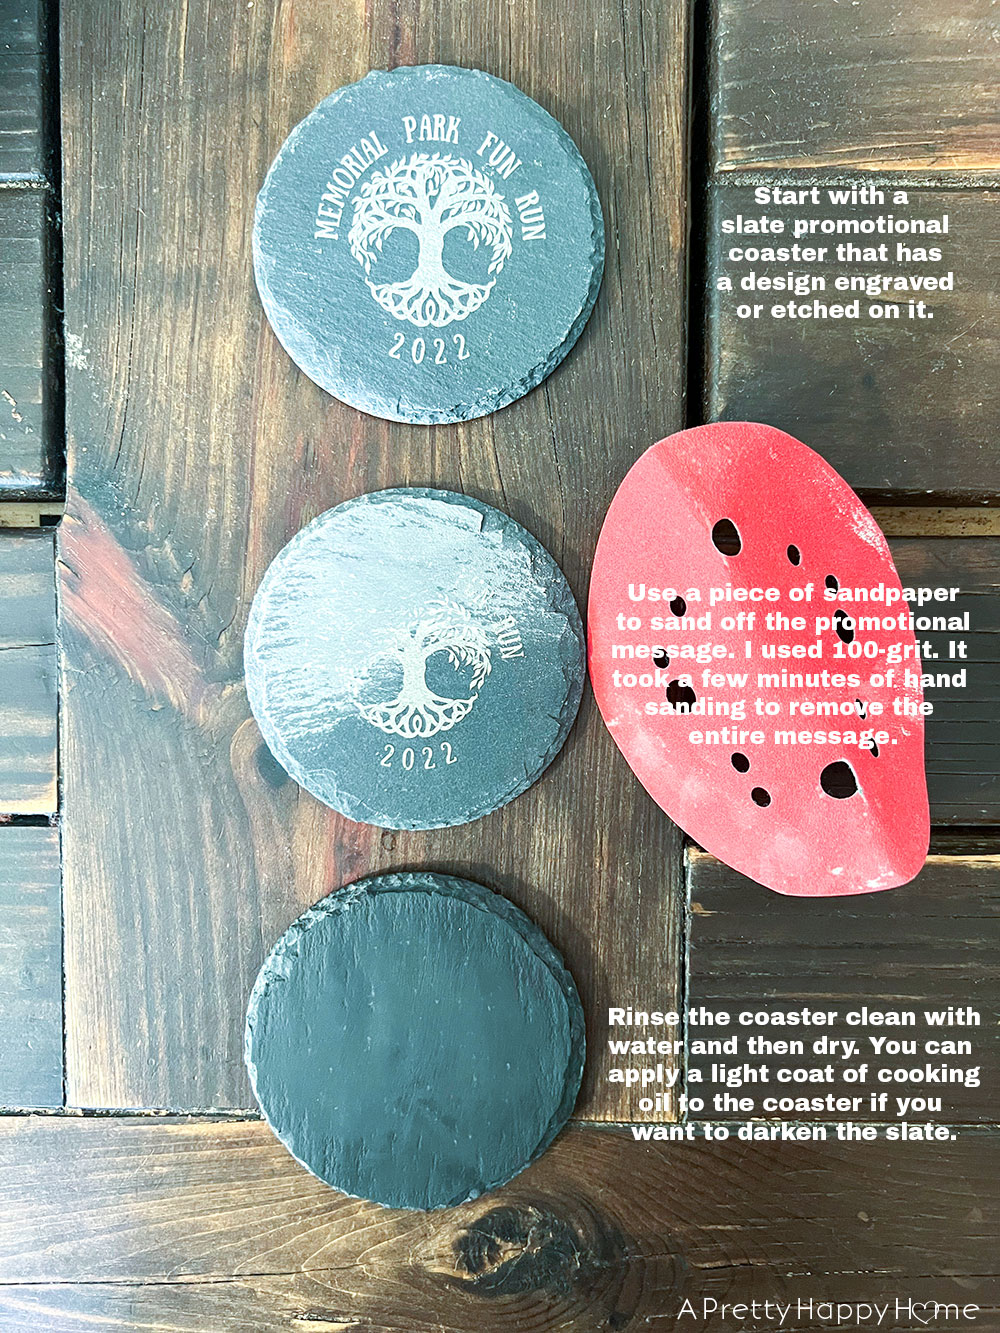 How To Remove The Engraving On Slate Coasters